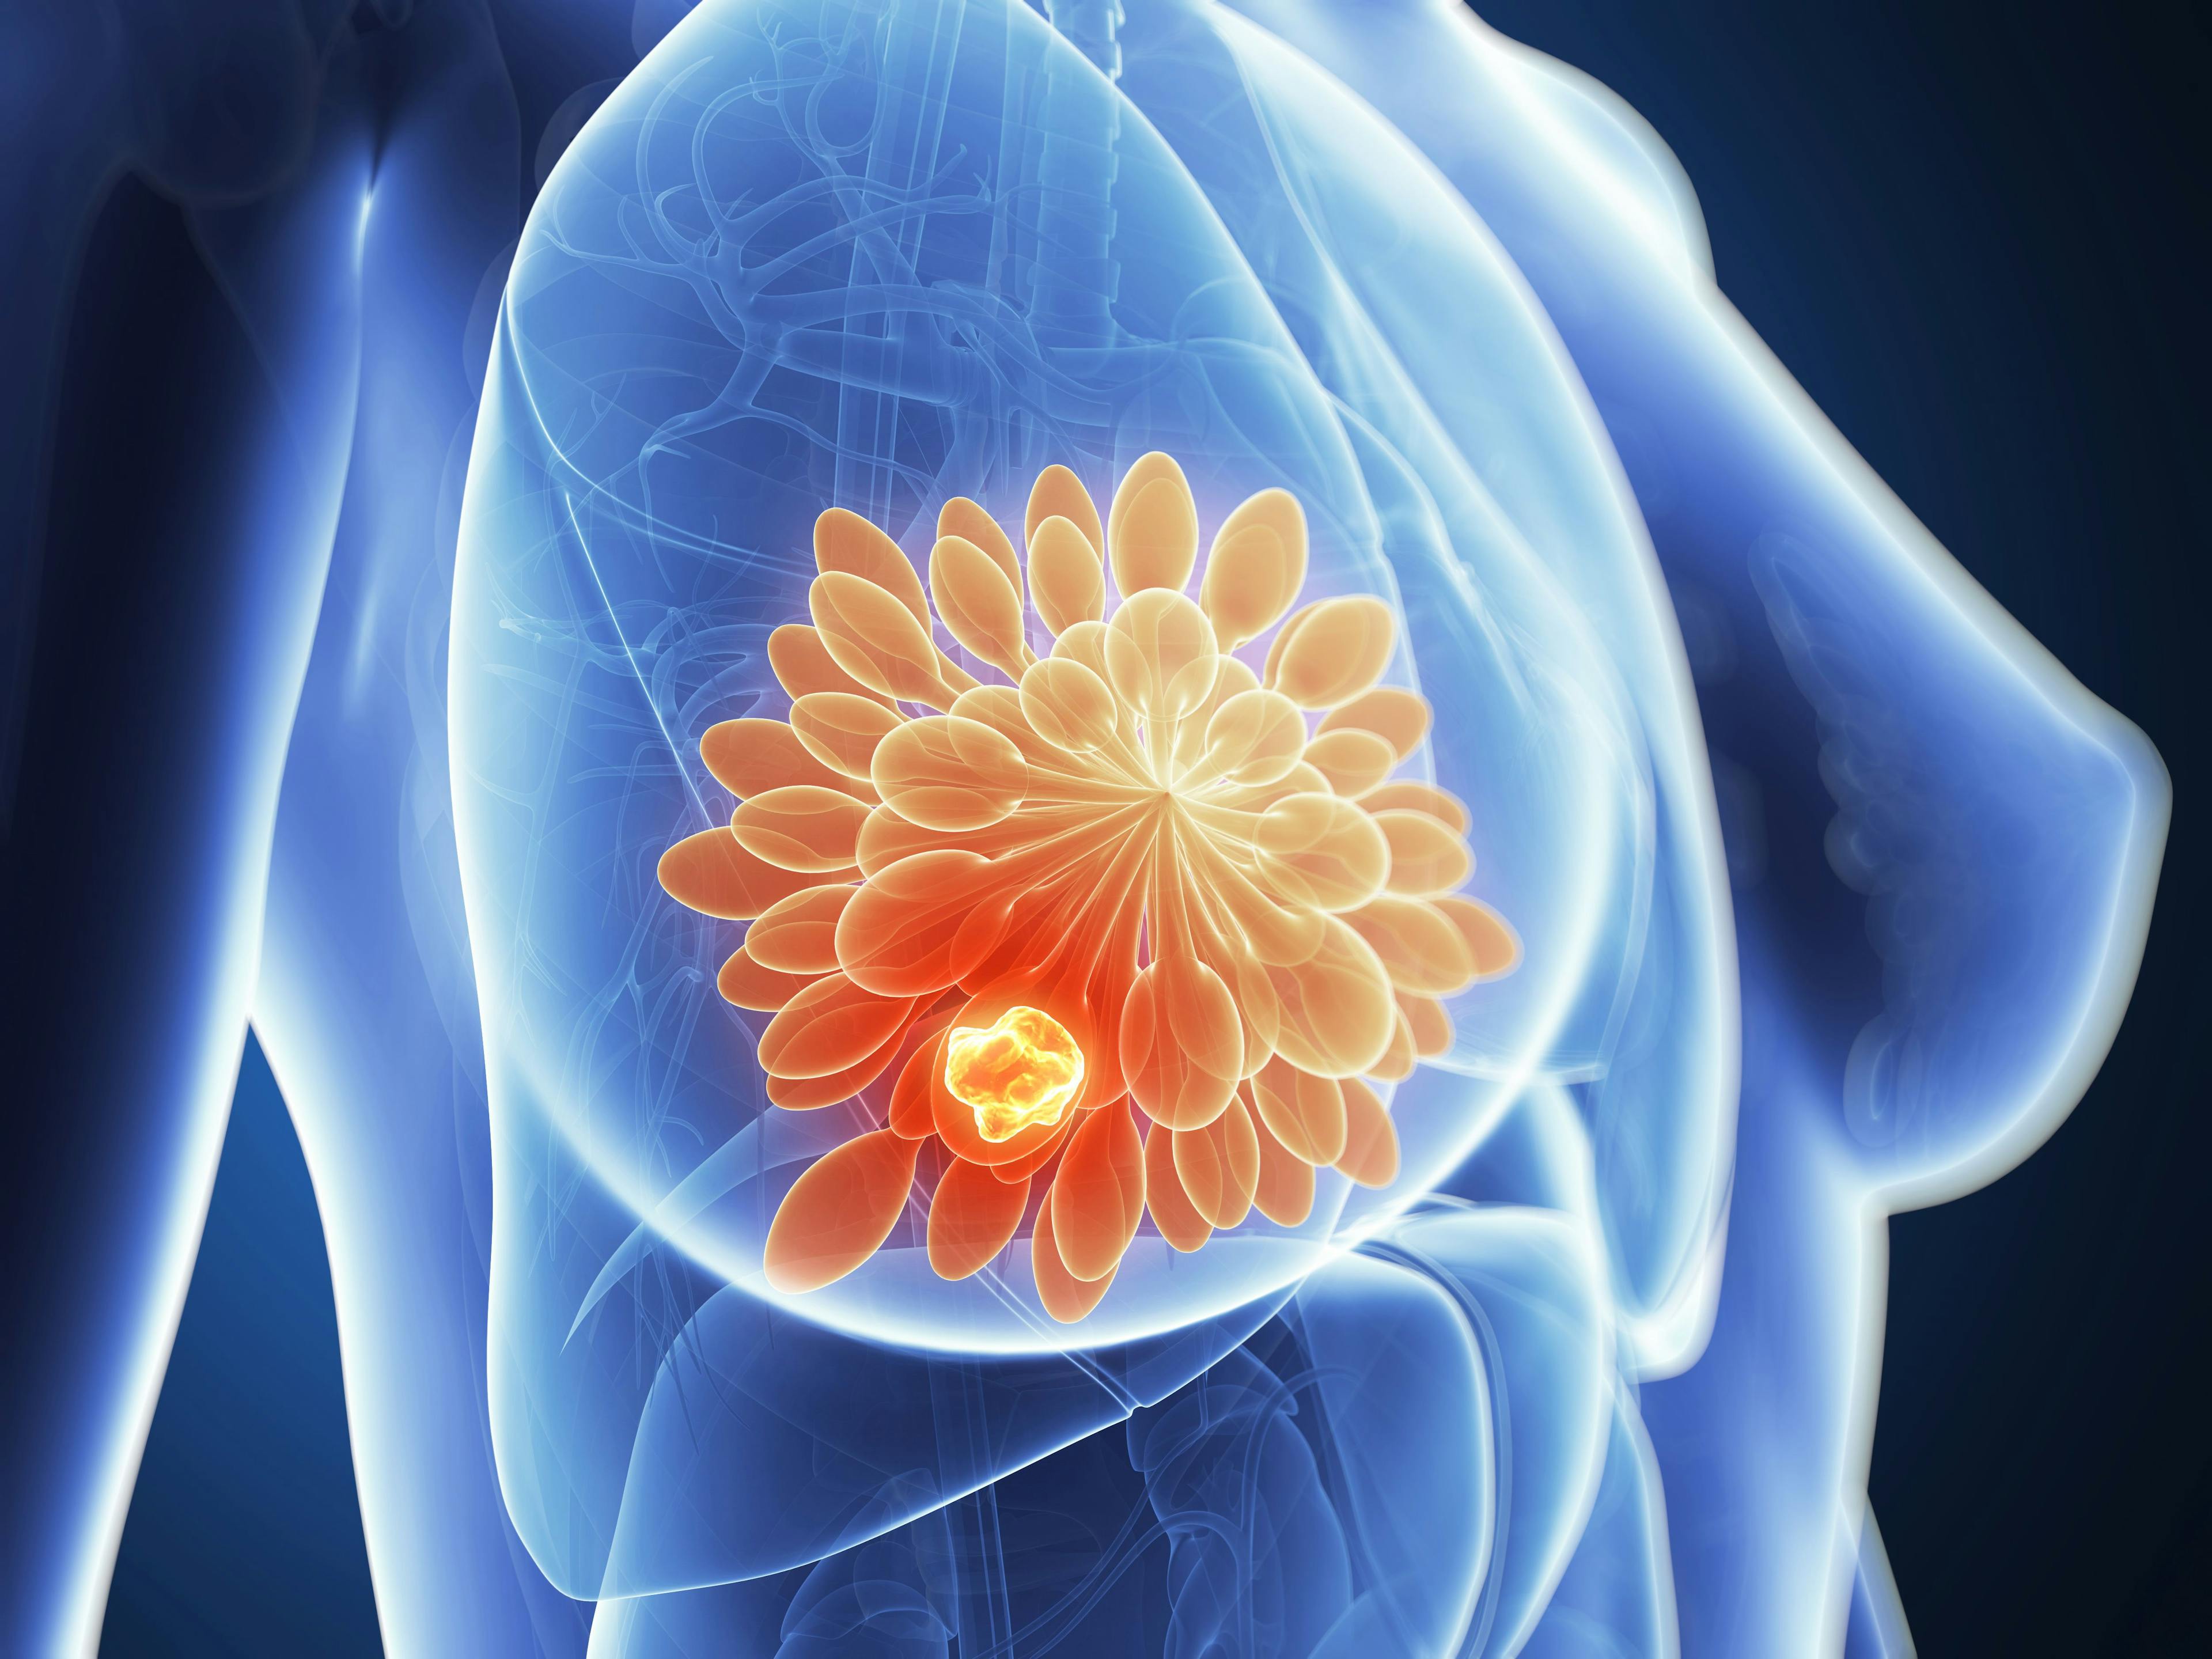 Camizestrant Shows Improved Survival Benefit Compared to Fulvestrant in Advanced ER-Positive Breast Cancer